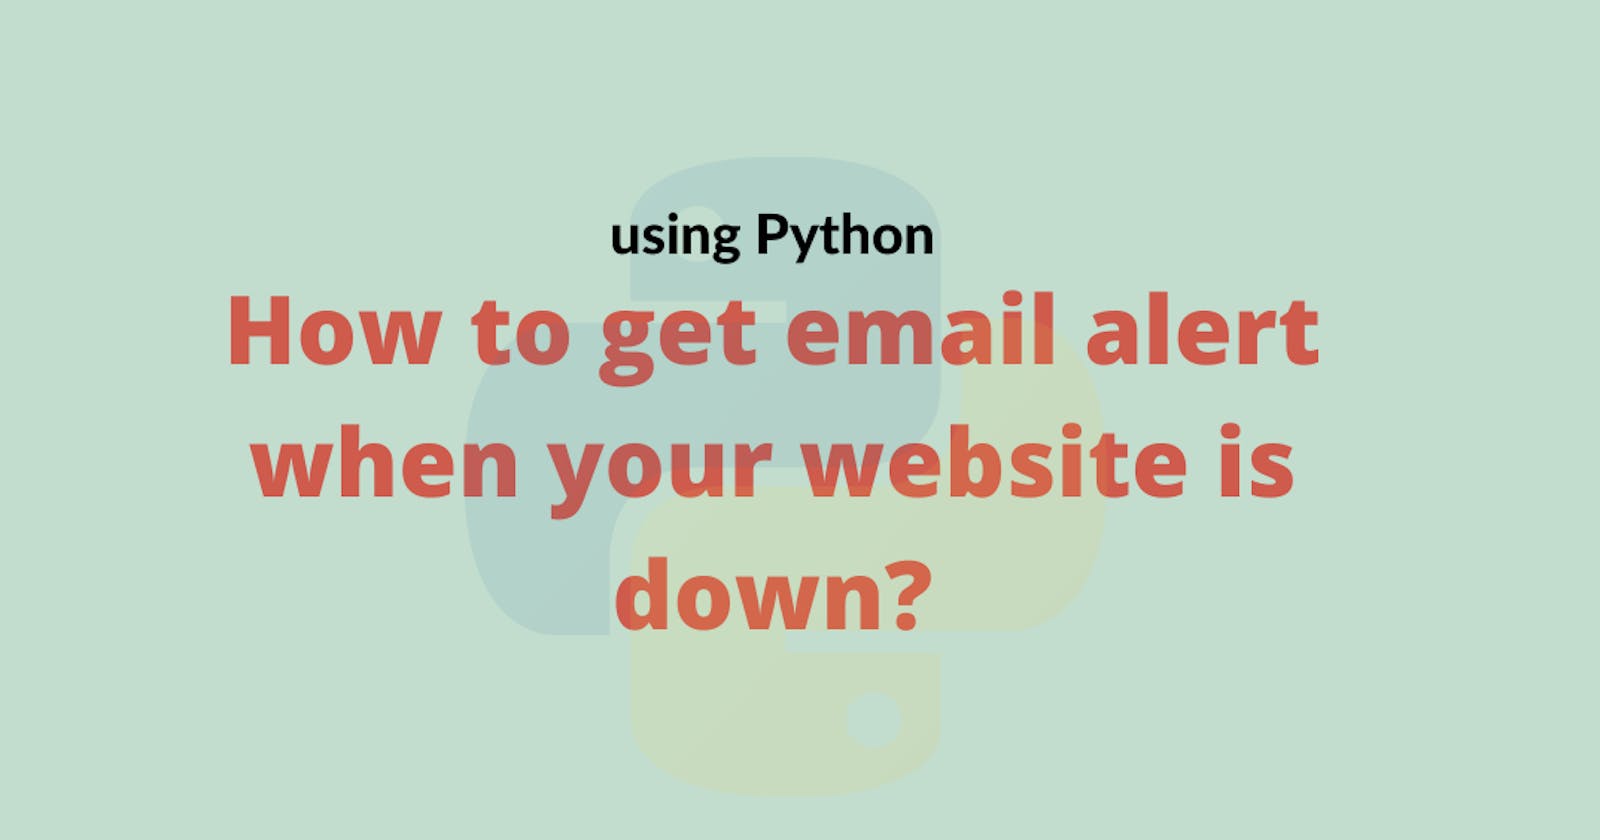 How to get email alert when your website is down using shell and Python?